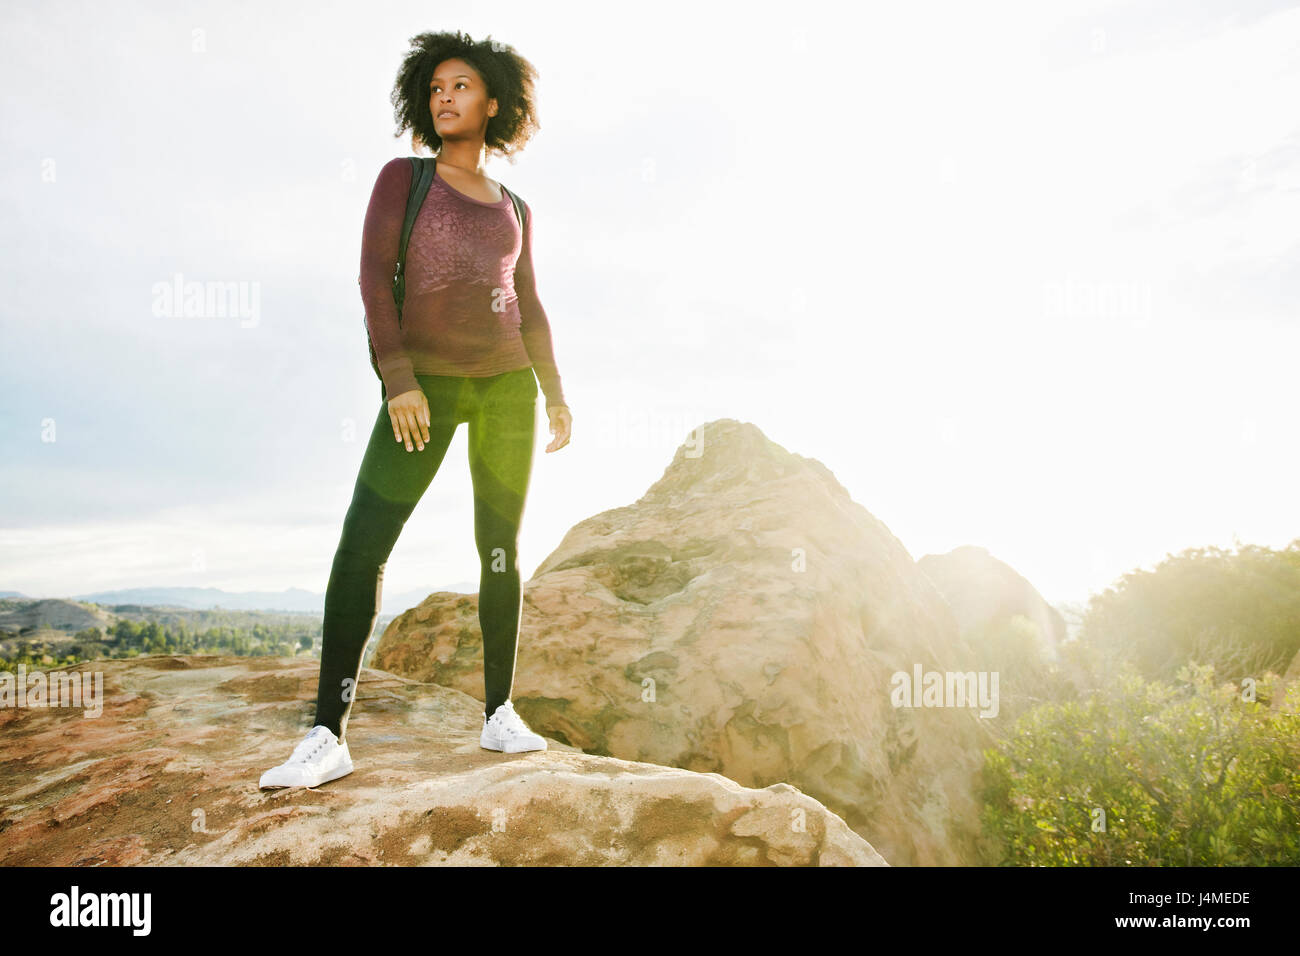 Black woman standing on rock formation Banque D'Images